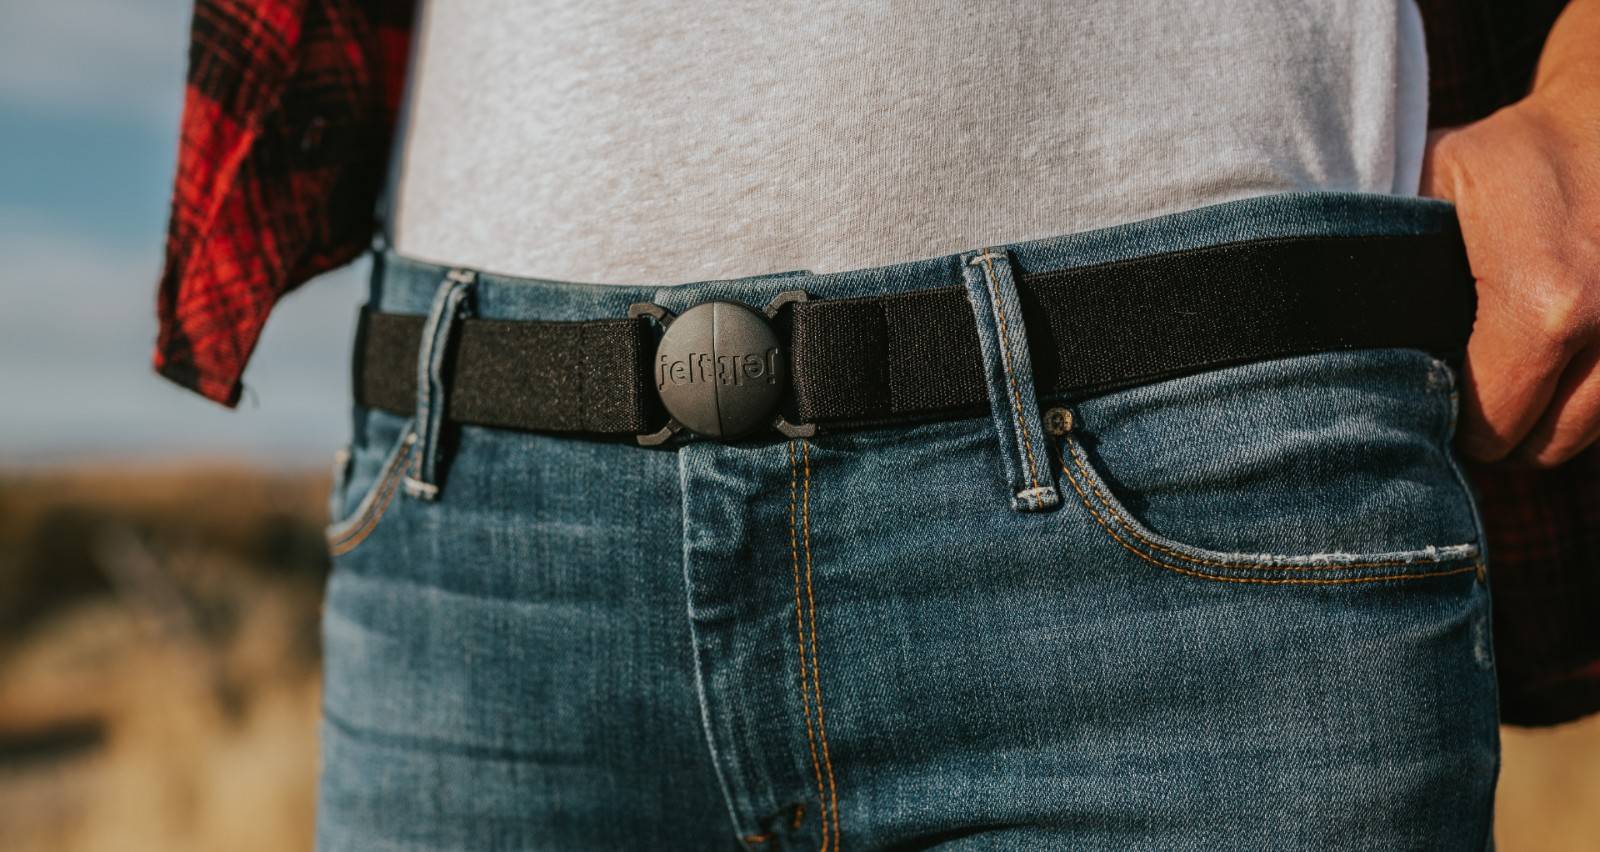 Woman featured wearing Jelt Original elastic stretch belt in black granite. Worn with jeans, white t-shirt and a red flannel shirt.